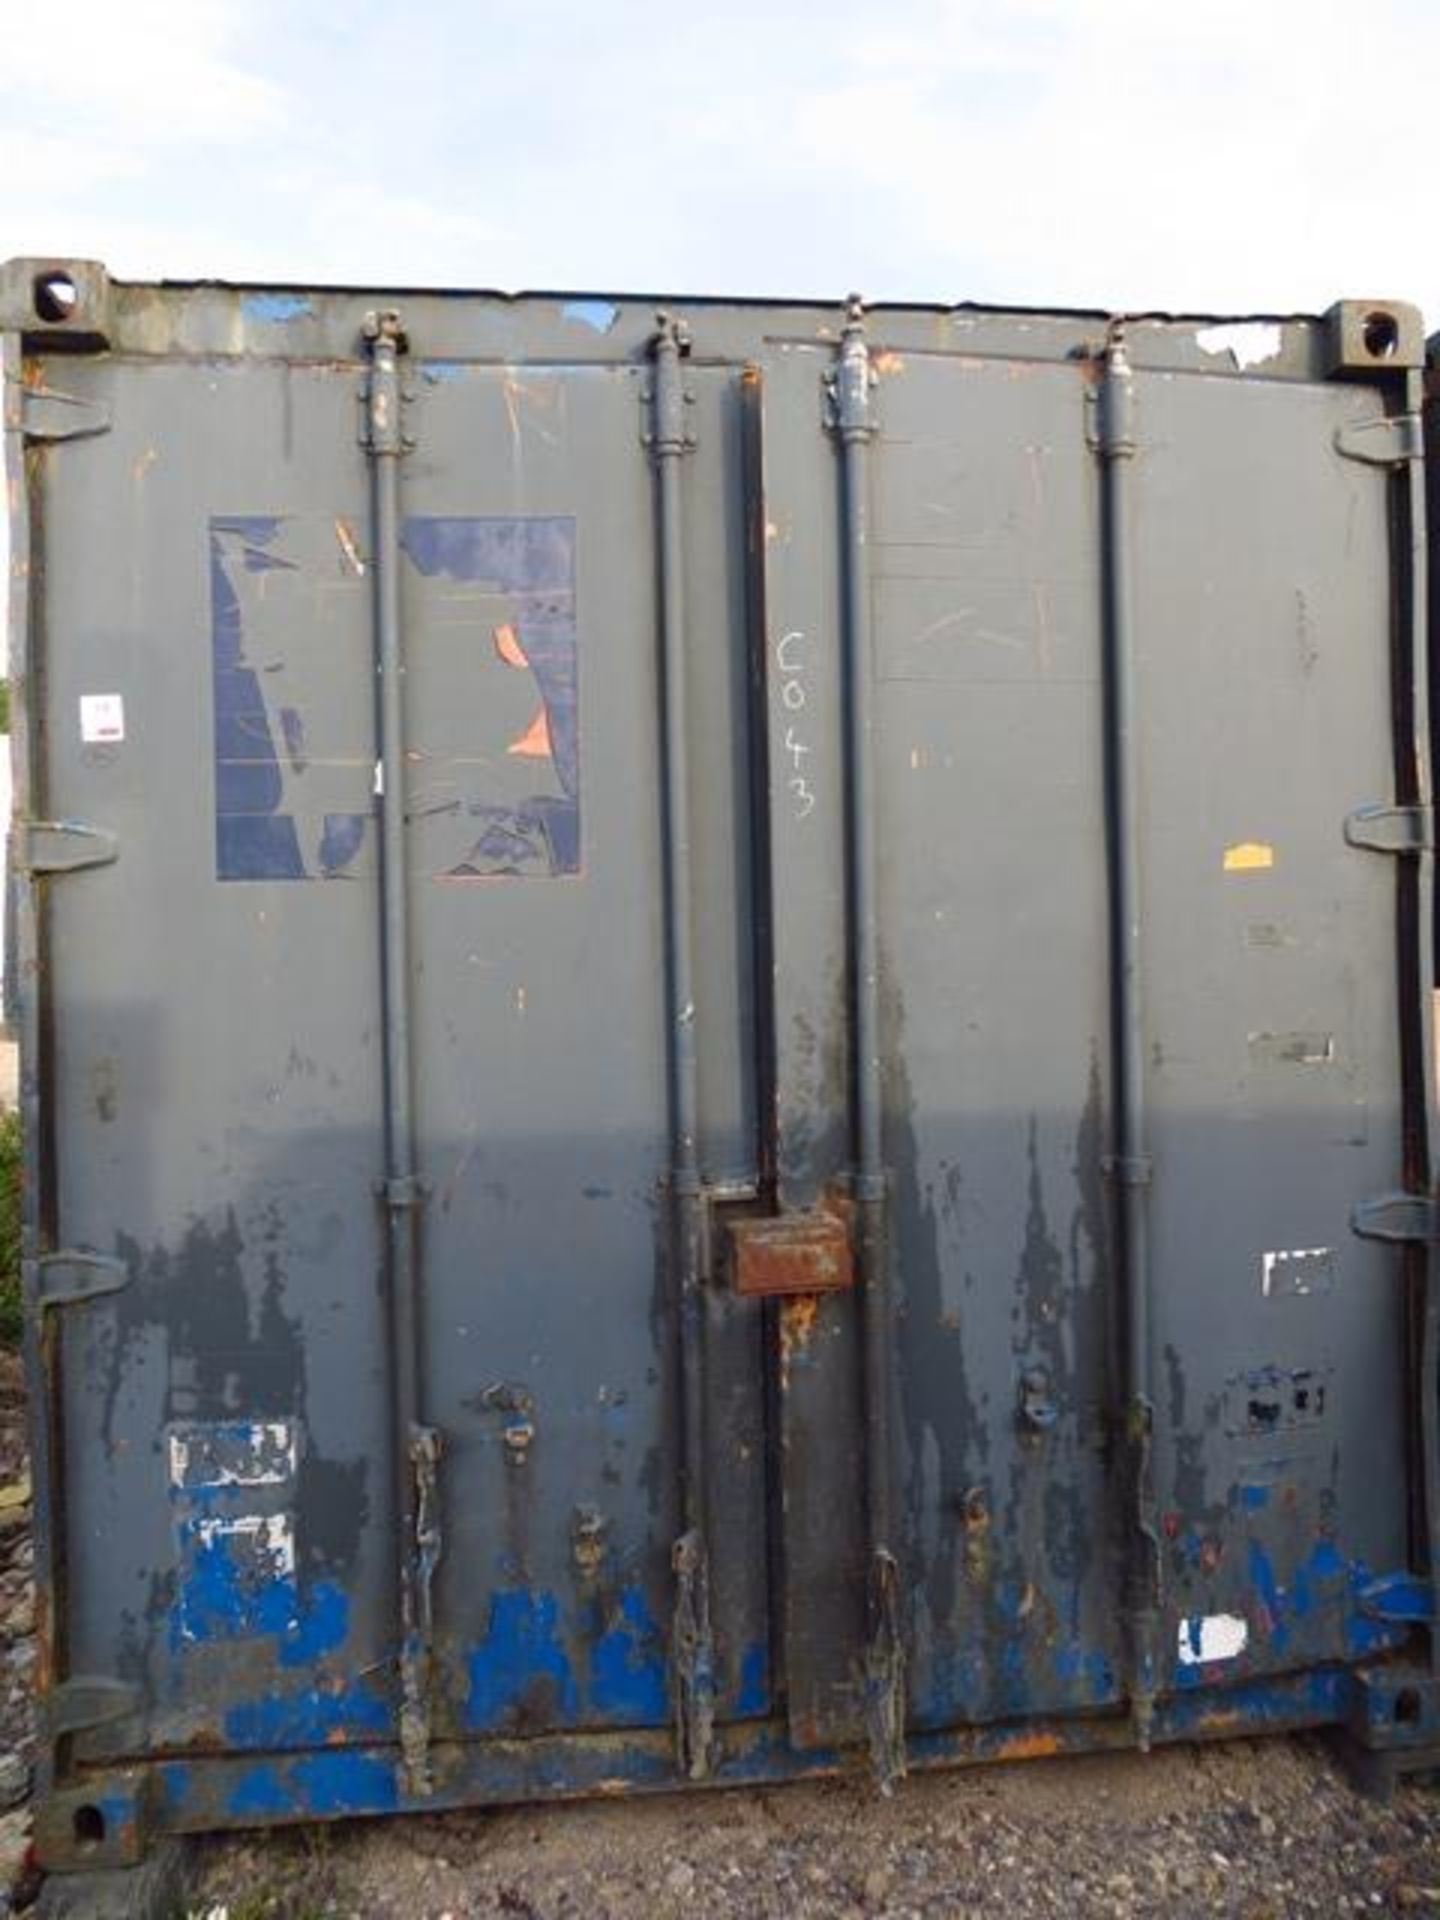 20' x 9' Steel Shipping Container excluding Contents *Note Collection Friday 11th October 2019